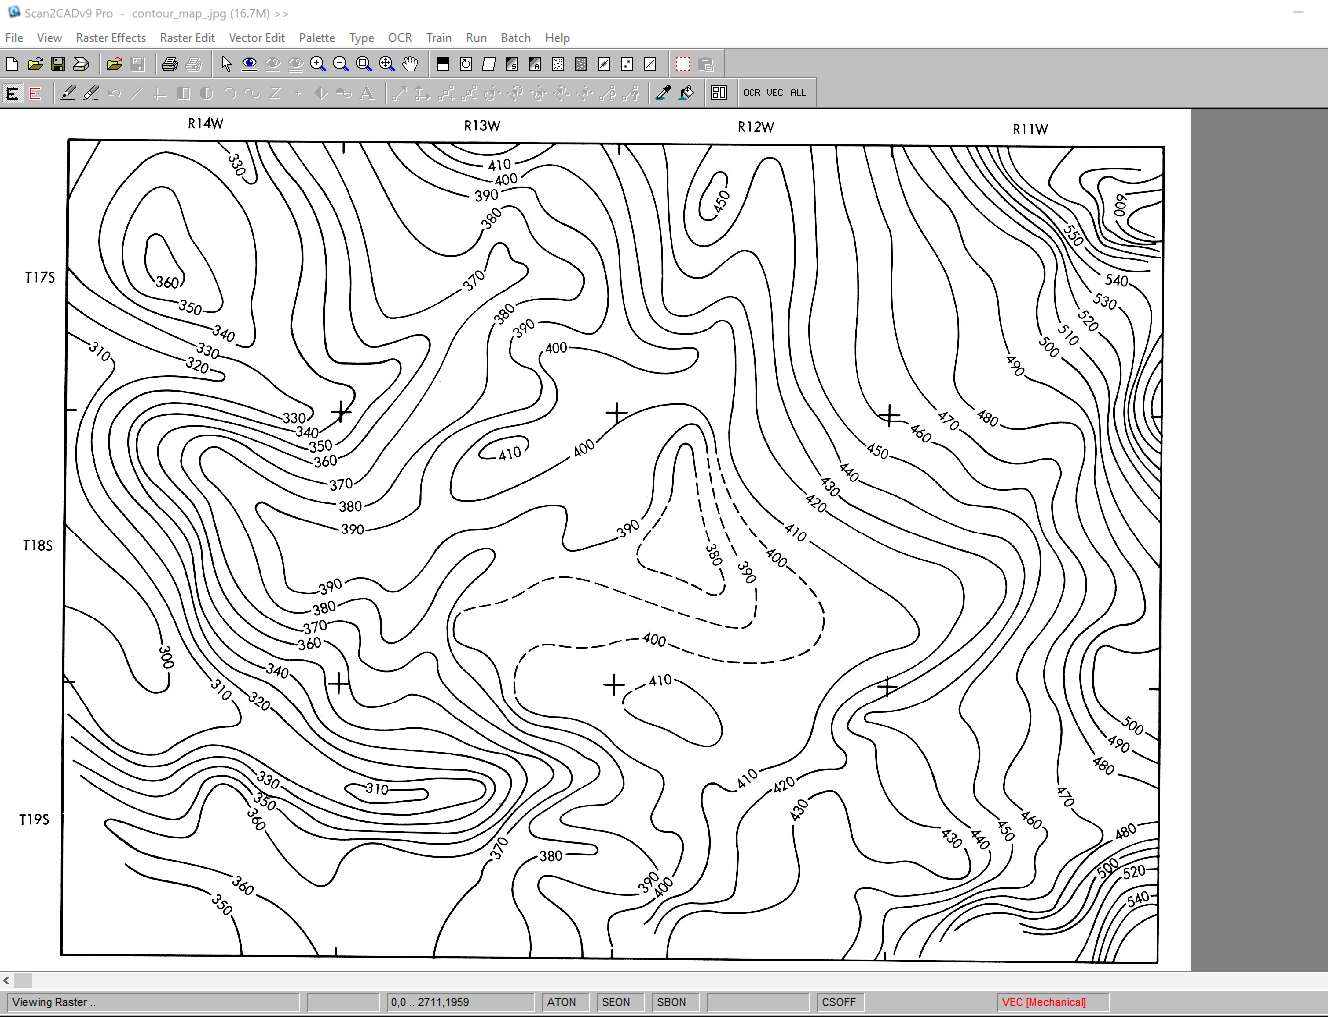 Animation demonstrating a contour map image converted to vector